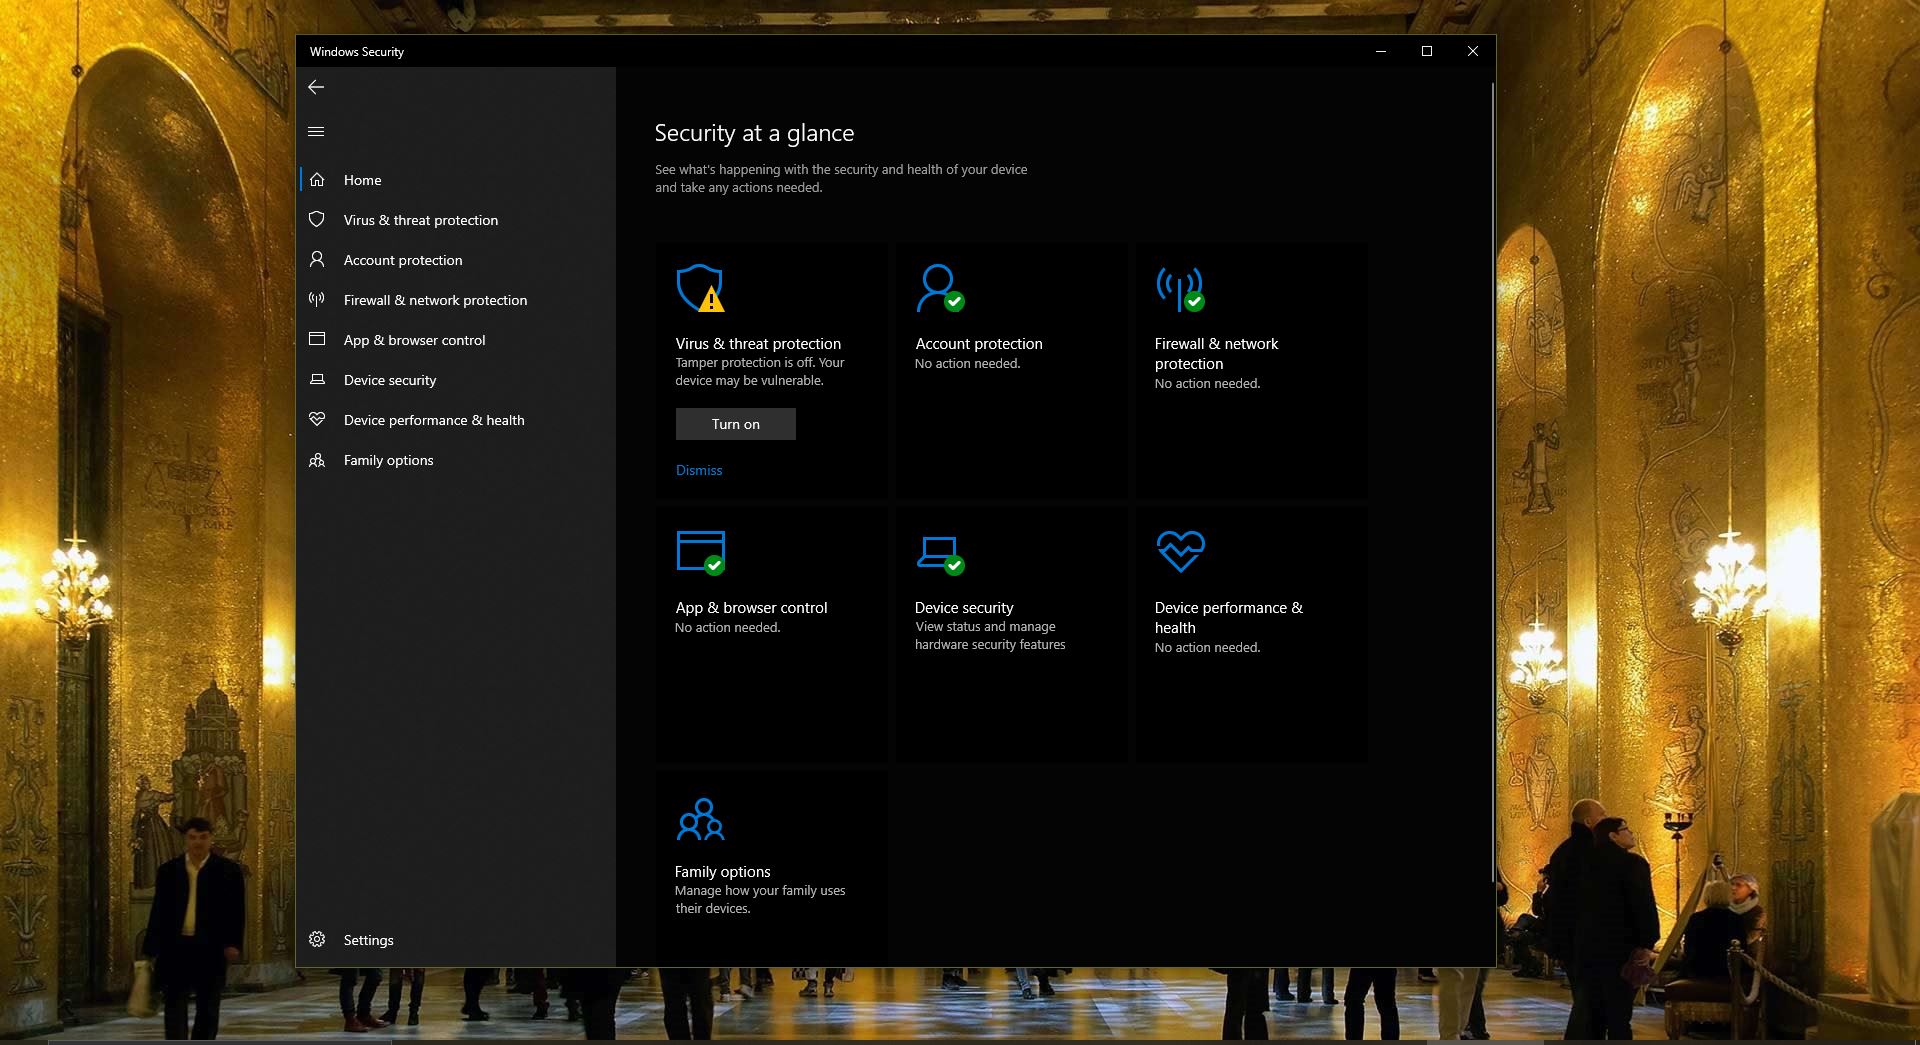 What is Windows Defender and how to enable windows defender?